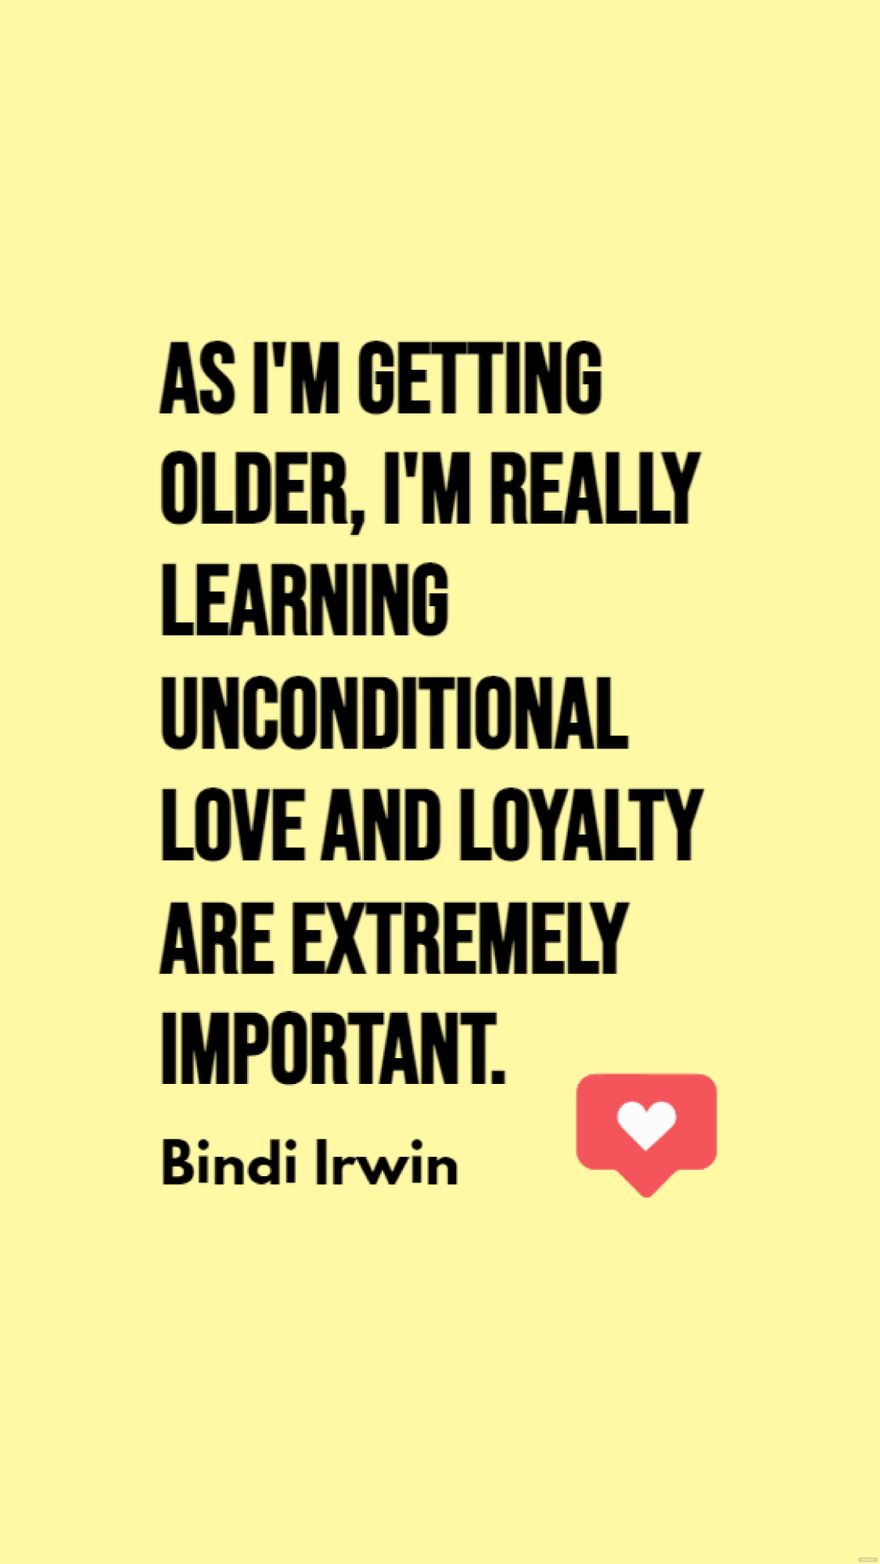 Free Bindi Irwin- As I'm getting older, I'm really learning unconditional love and loyalty are extremely important. in JPG